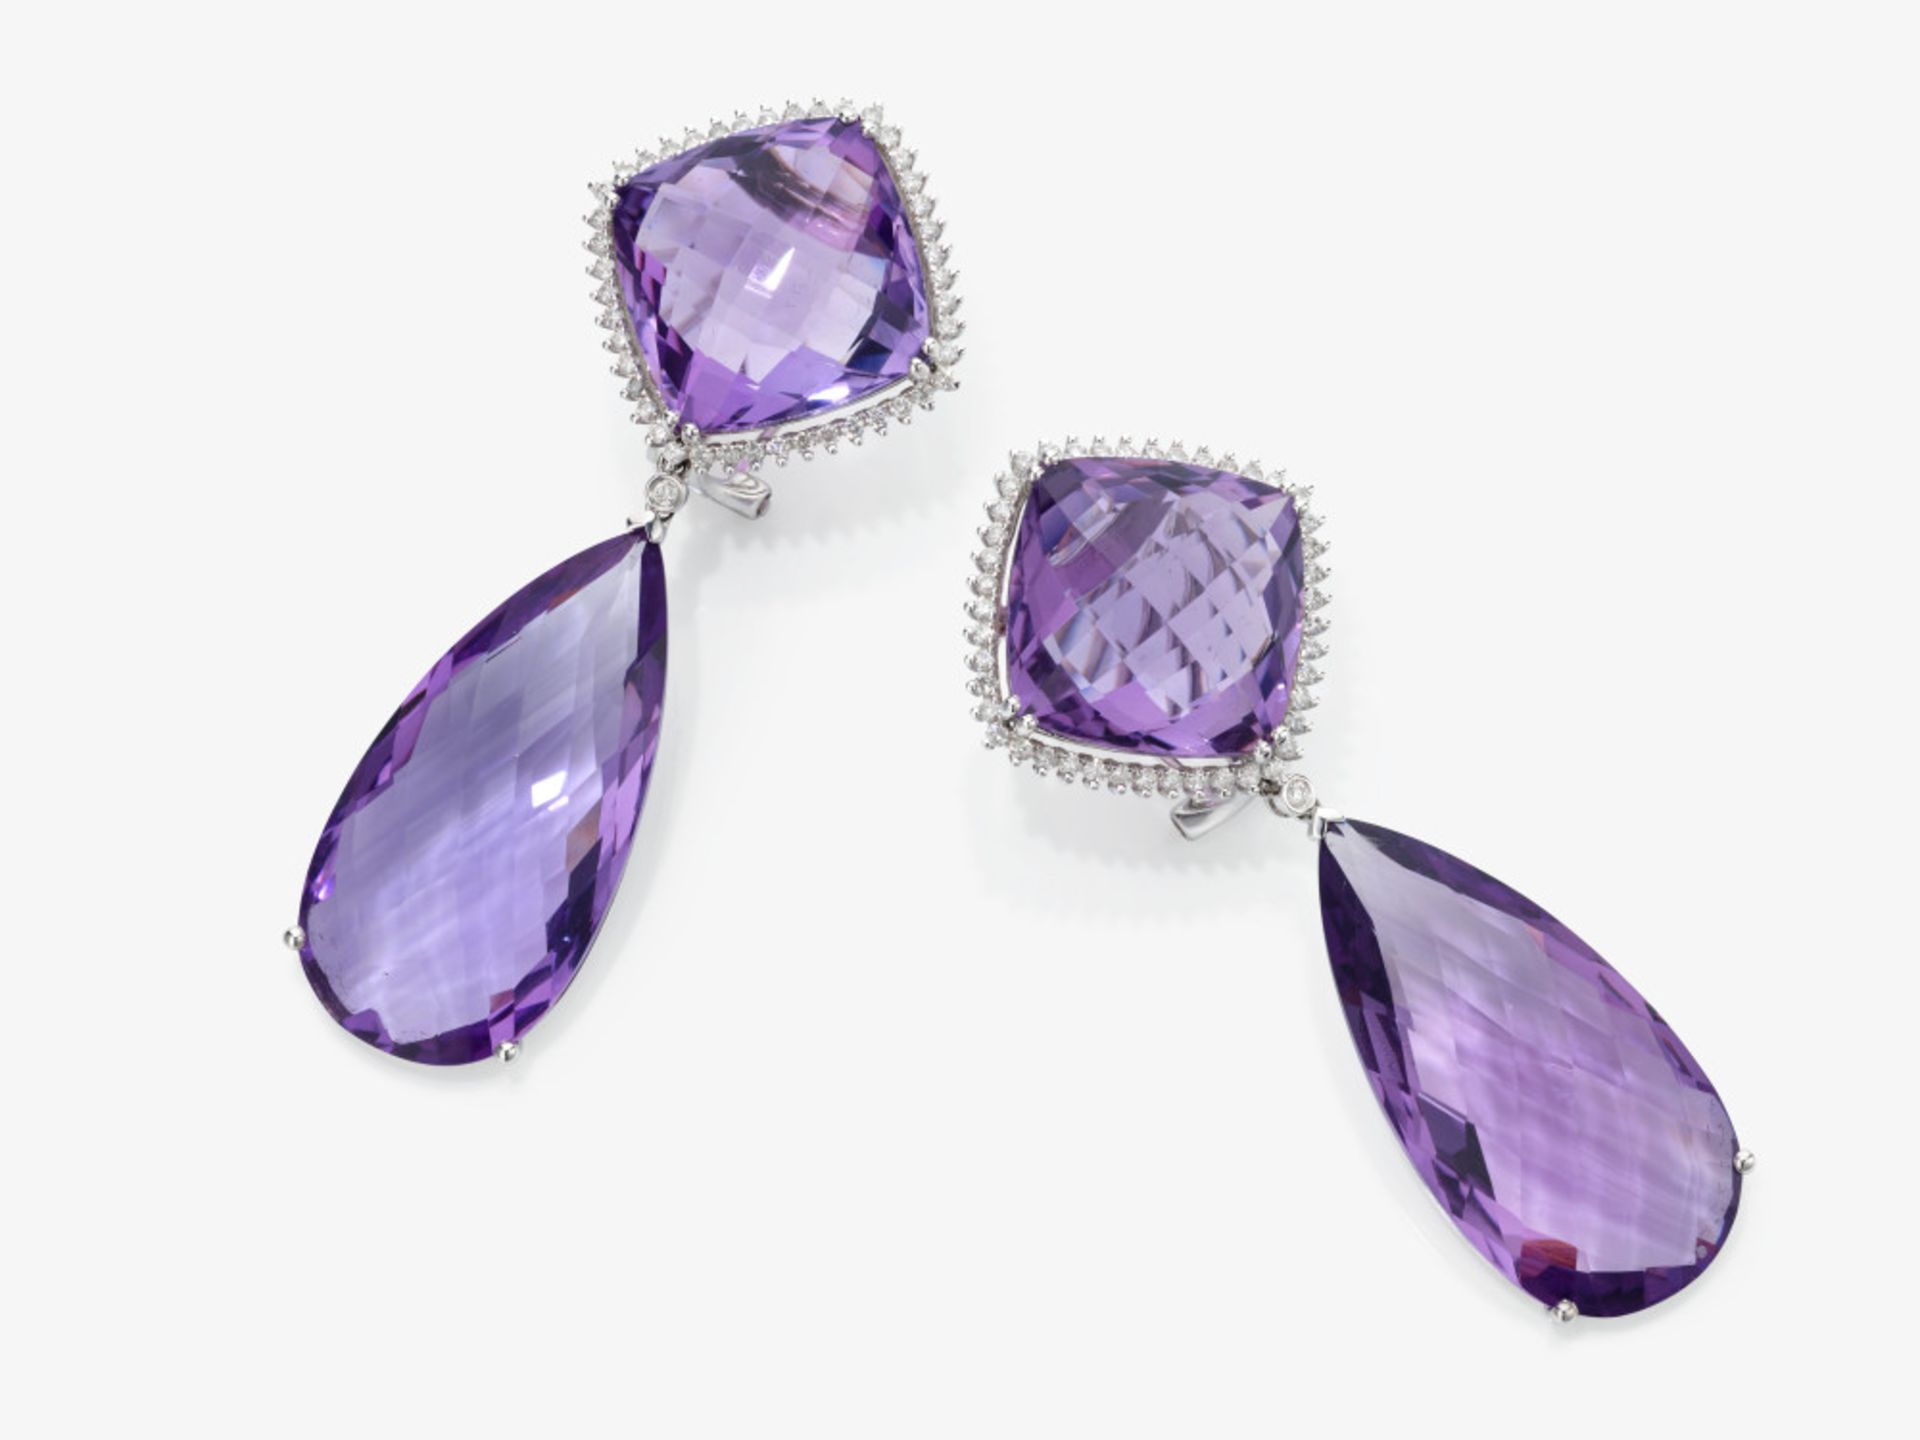 A pair of drop earrings with amethysts and brilliant-cut diamonds - Image 2 of 2